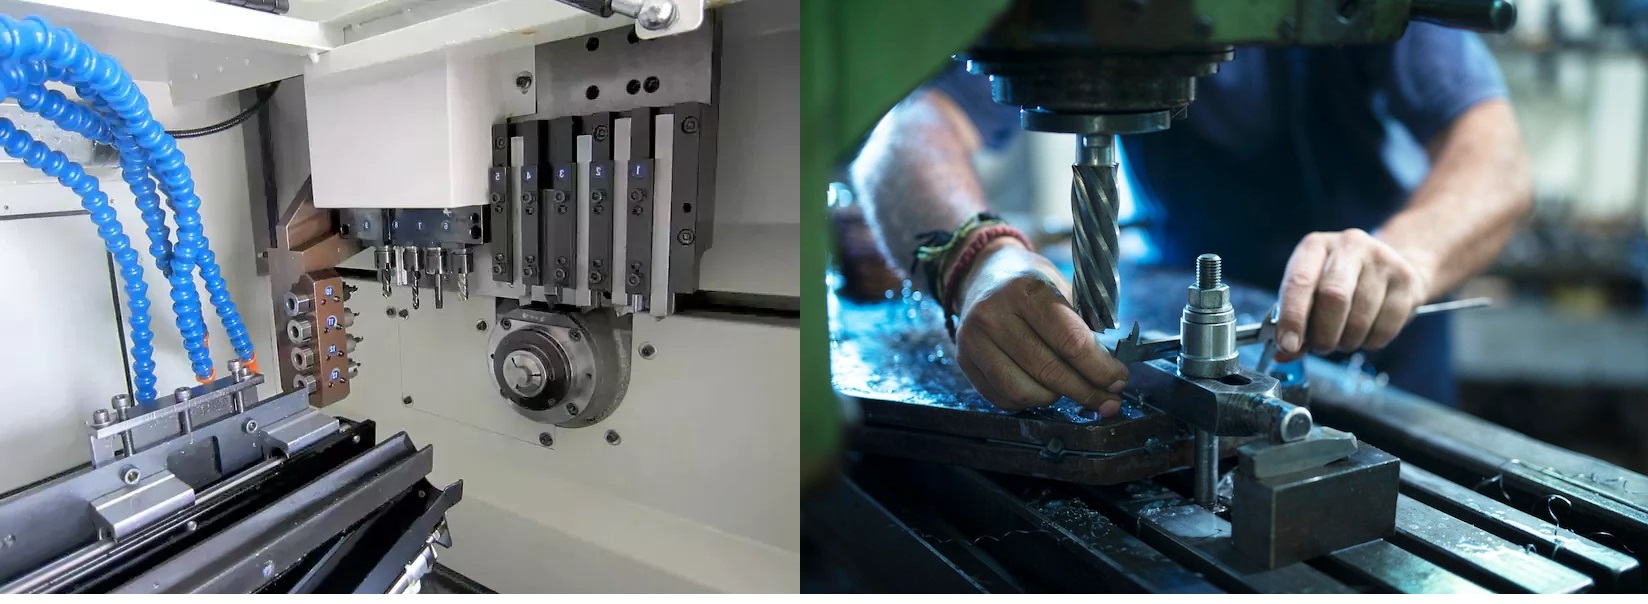 HERE ARE THE BEST ADVANTAGES OF OUTSOURCING PRECISION CNC MACHINING SERVICES